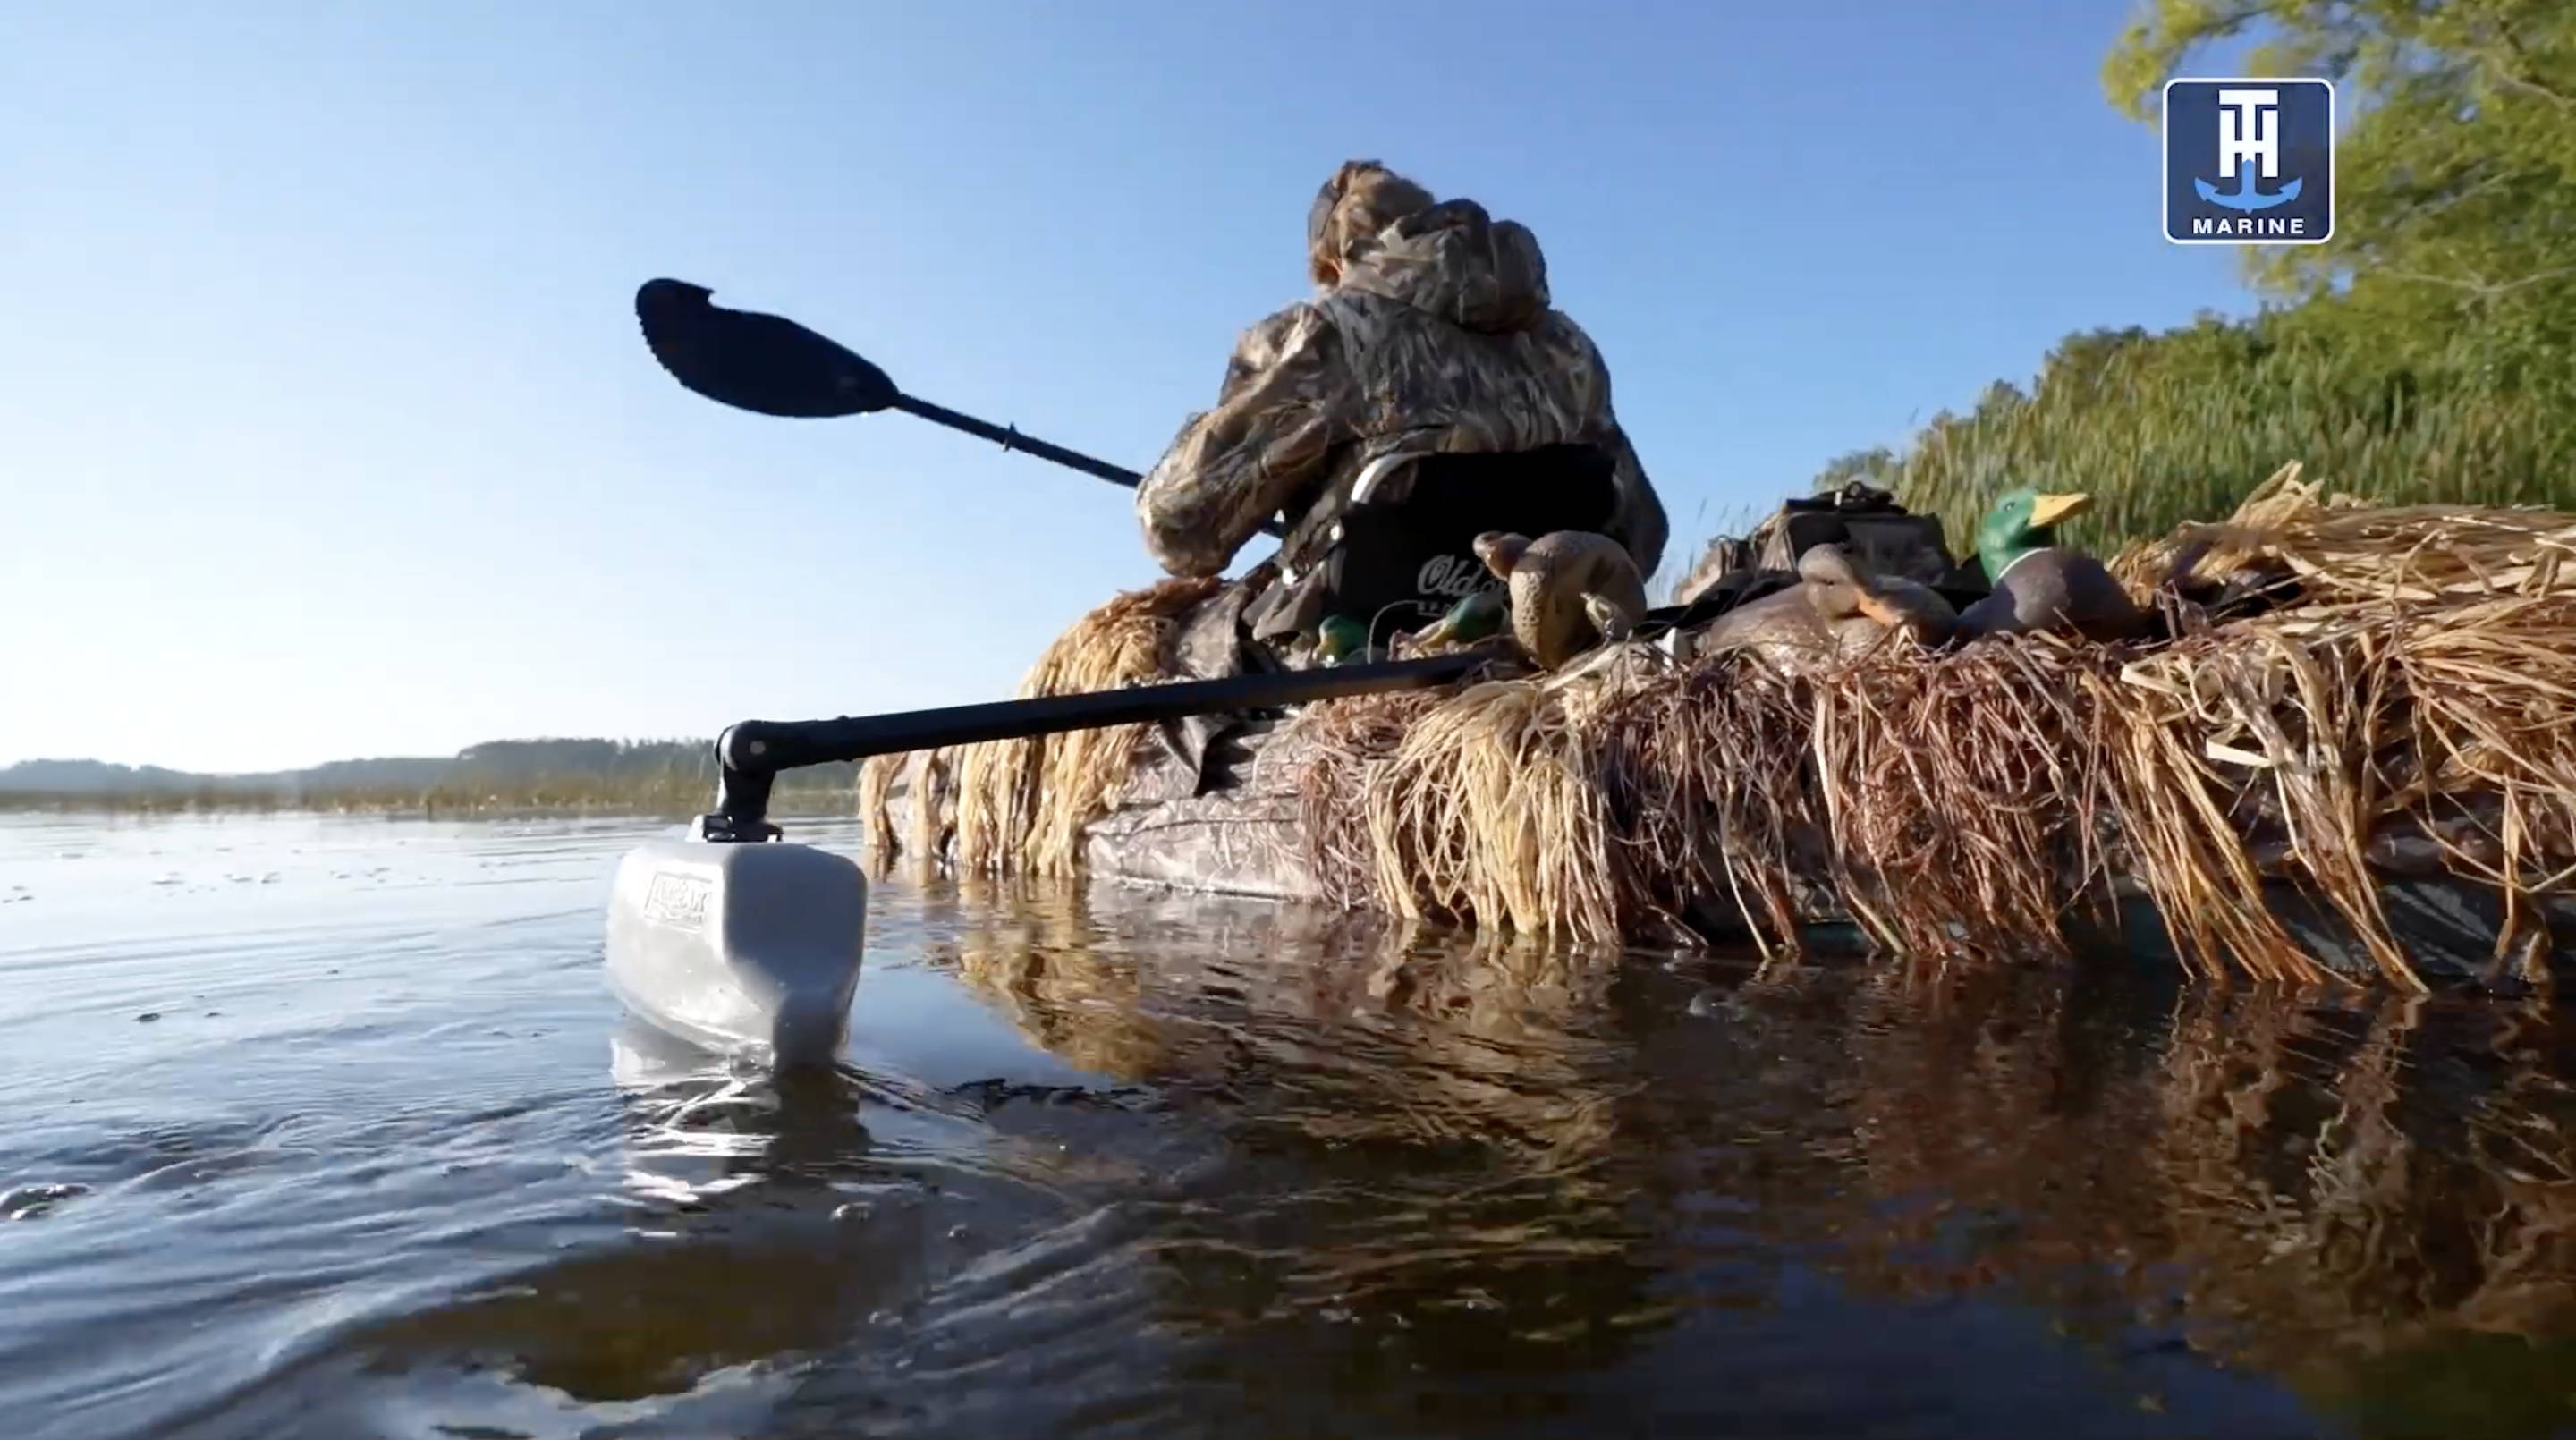 For a duck hunting kayak, removable hunting blinds are essential